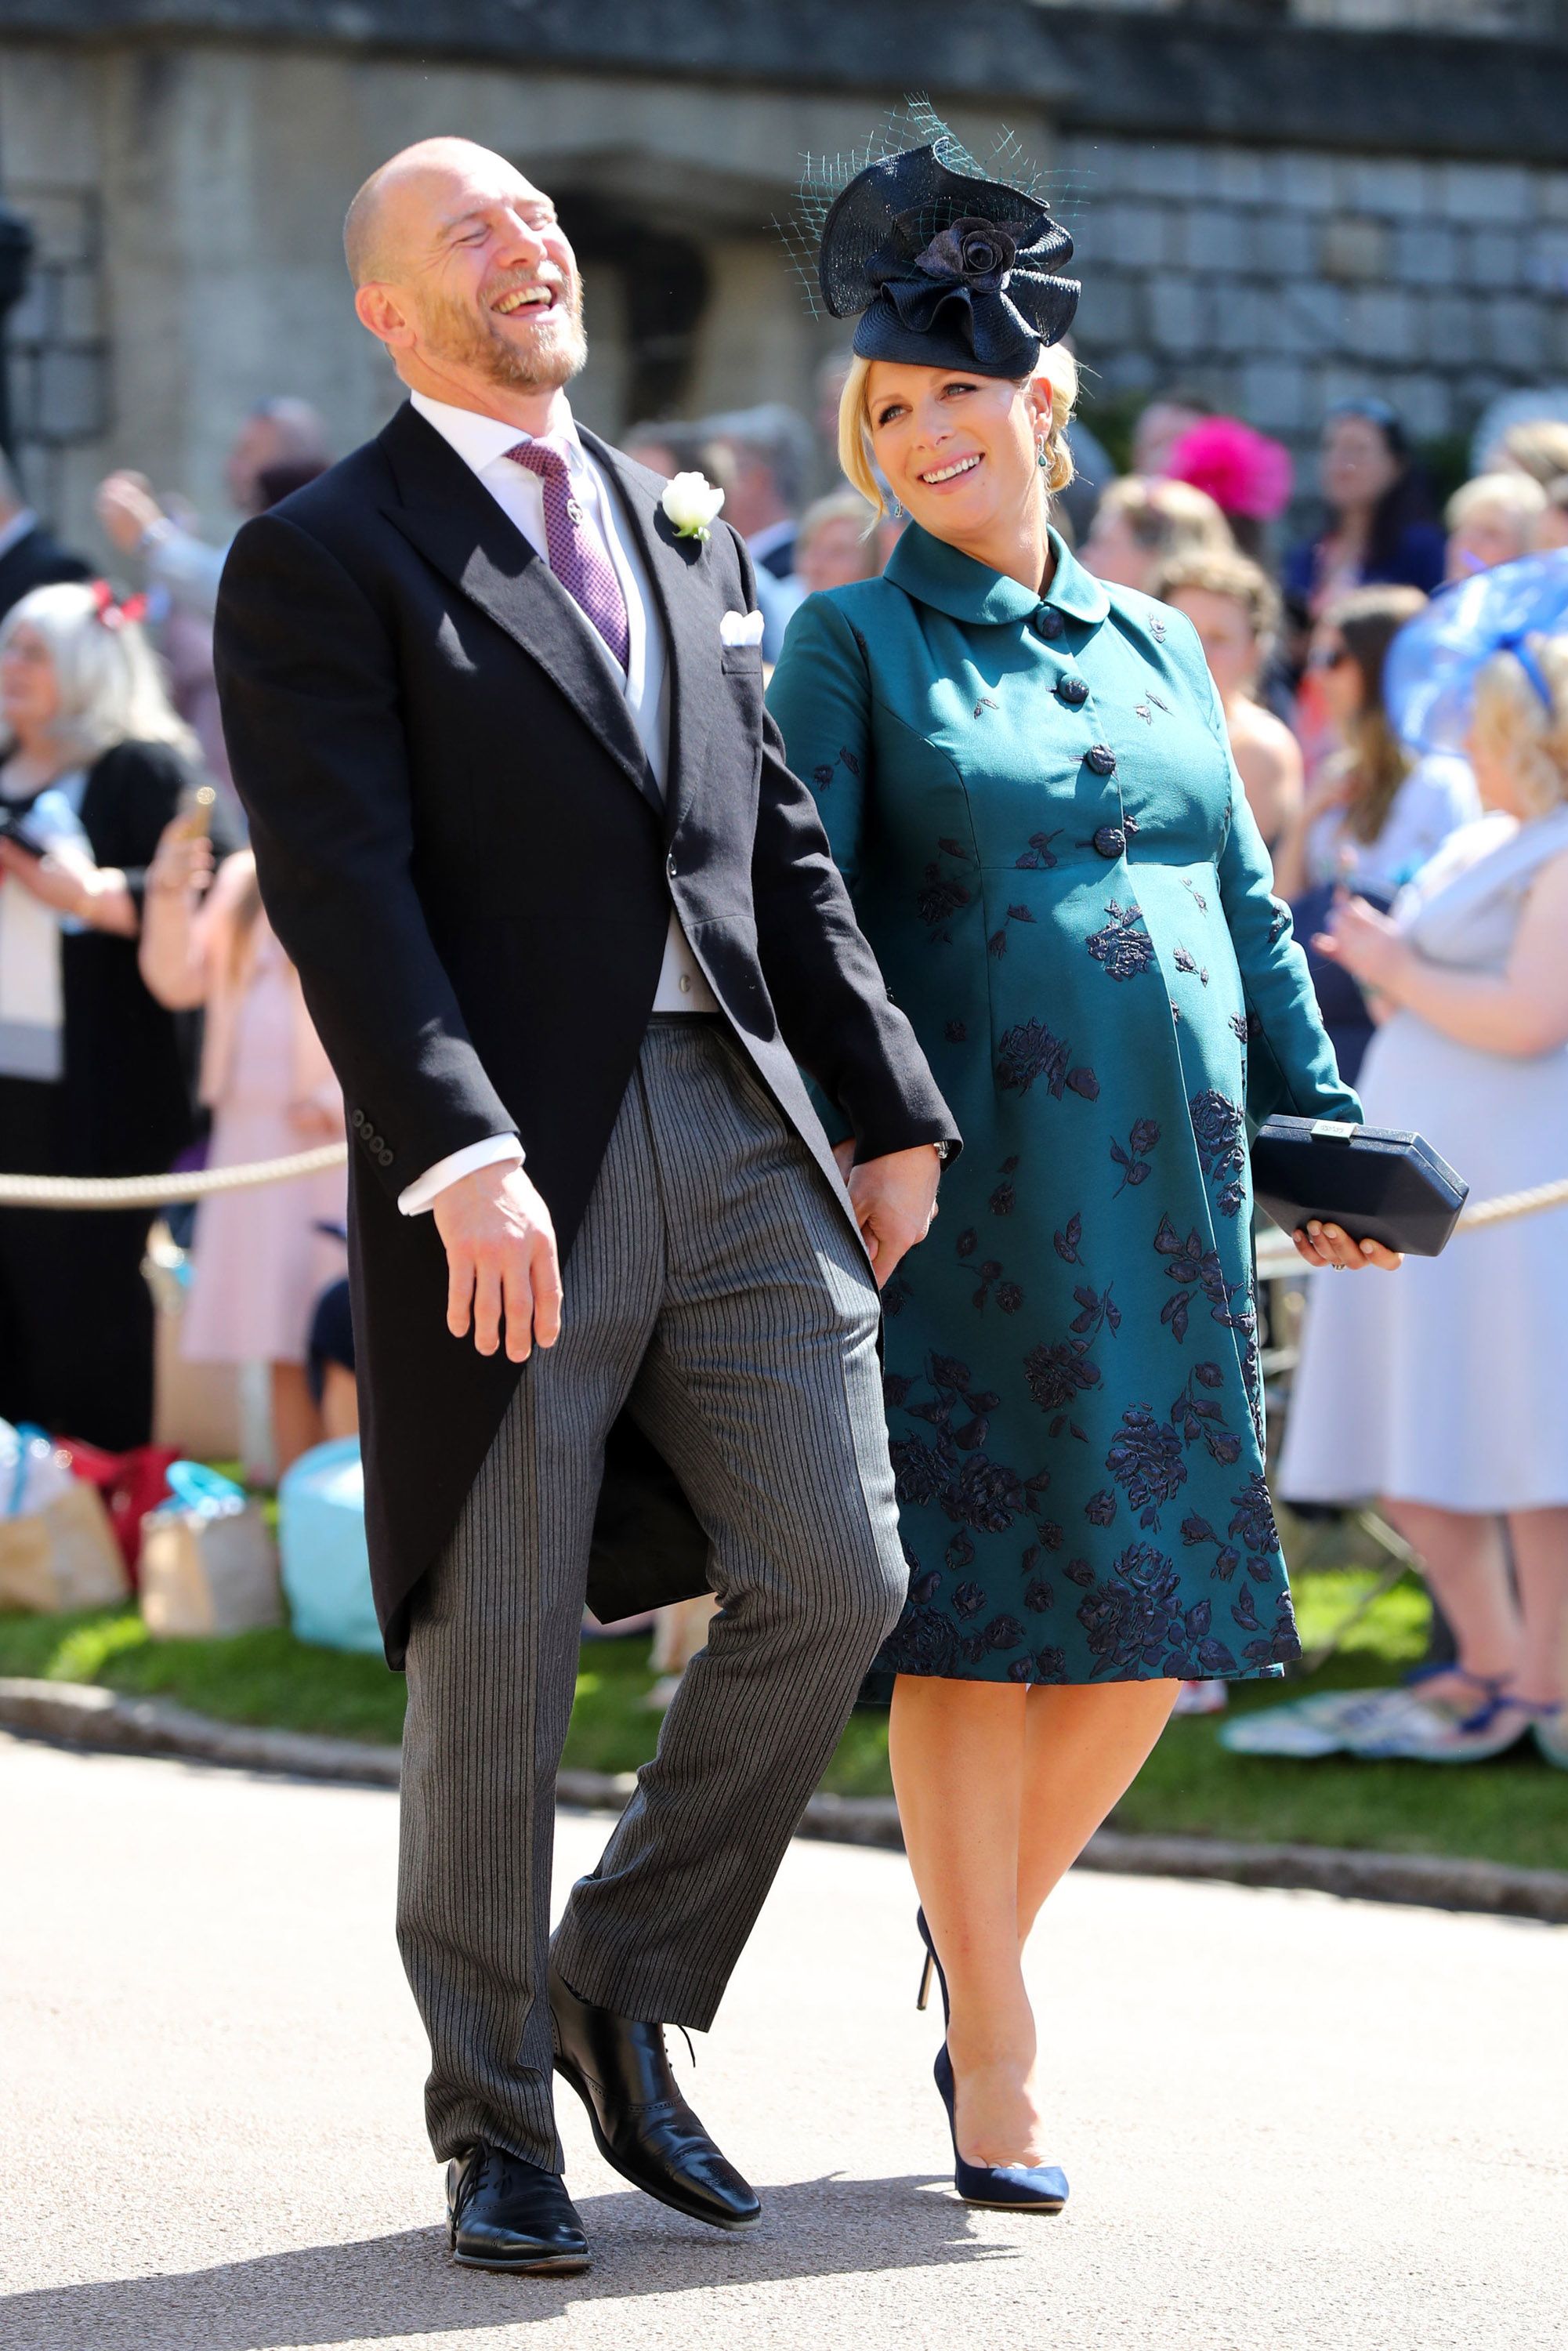 All Royal Wedding Best Dressed Guests - Prince Harry and Meghan